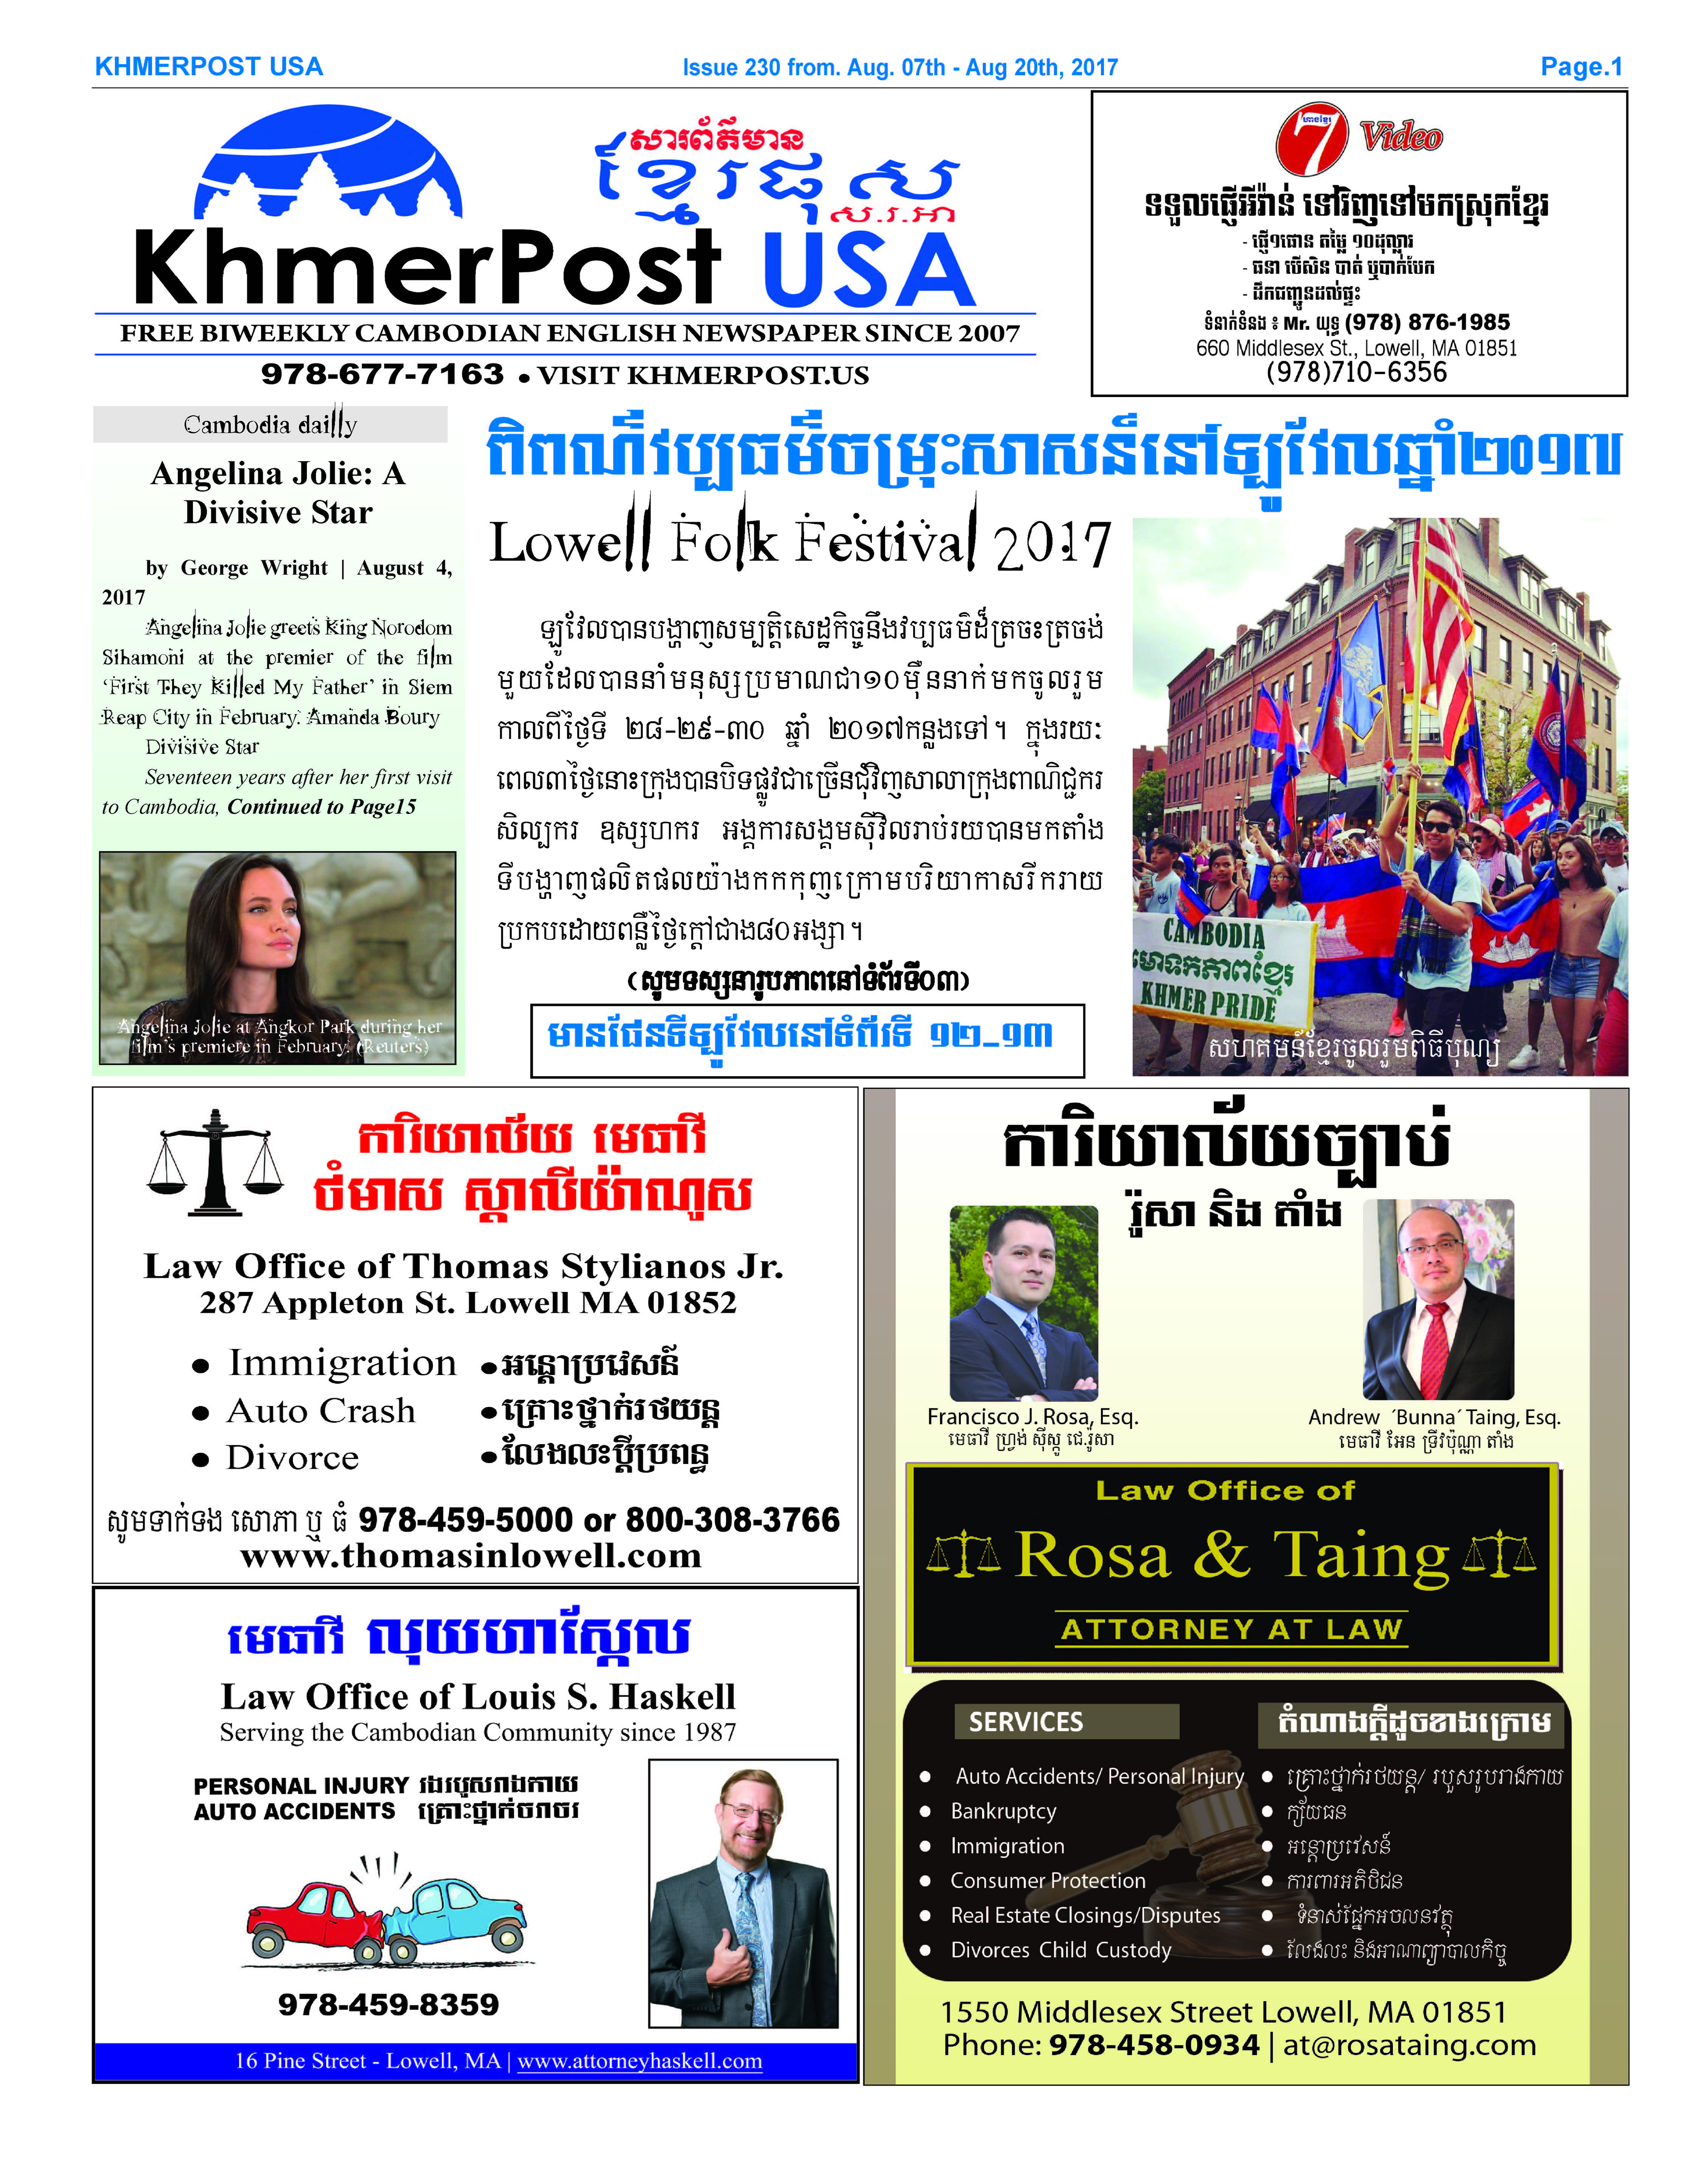 Issue 230. Aug. 07th - Aug 20th, 2017